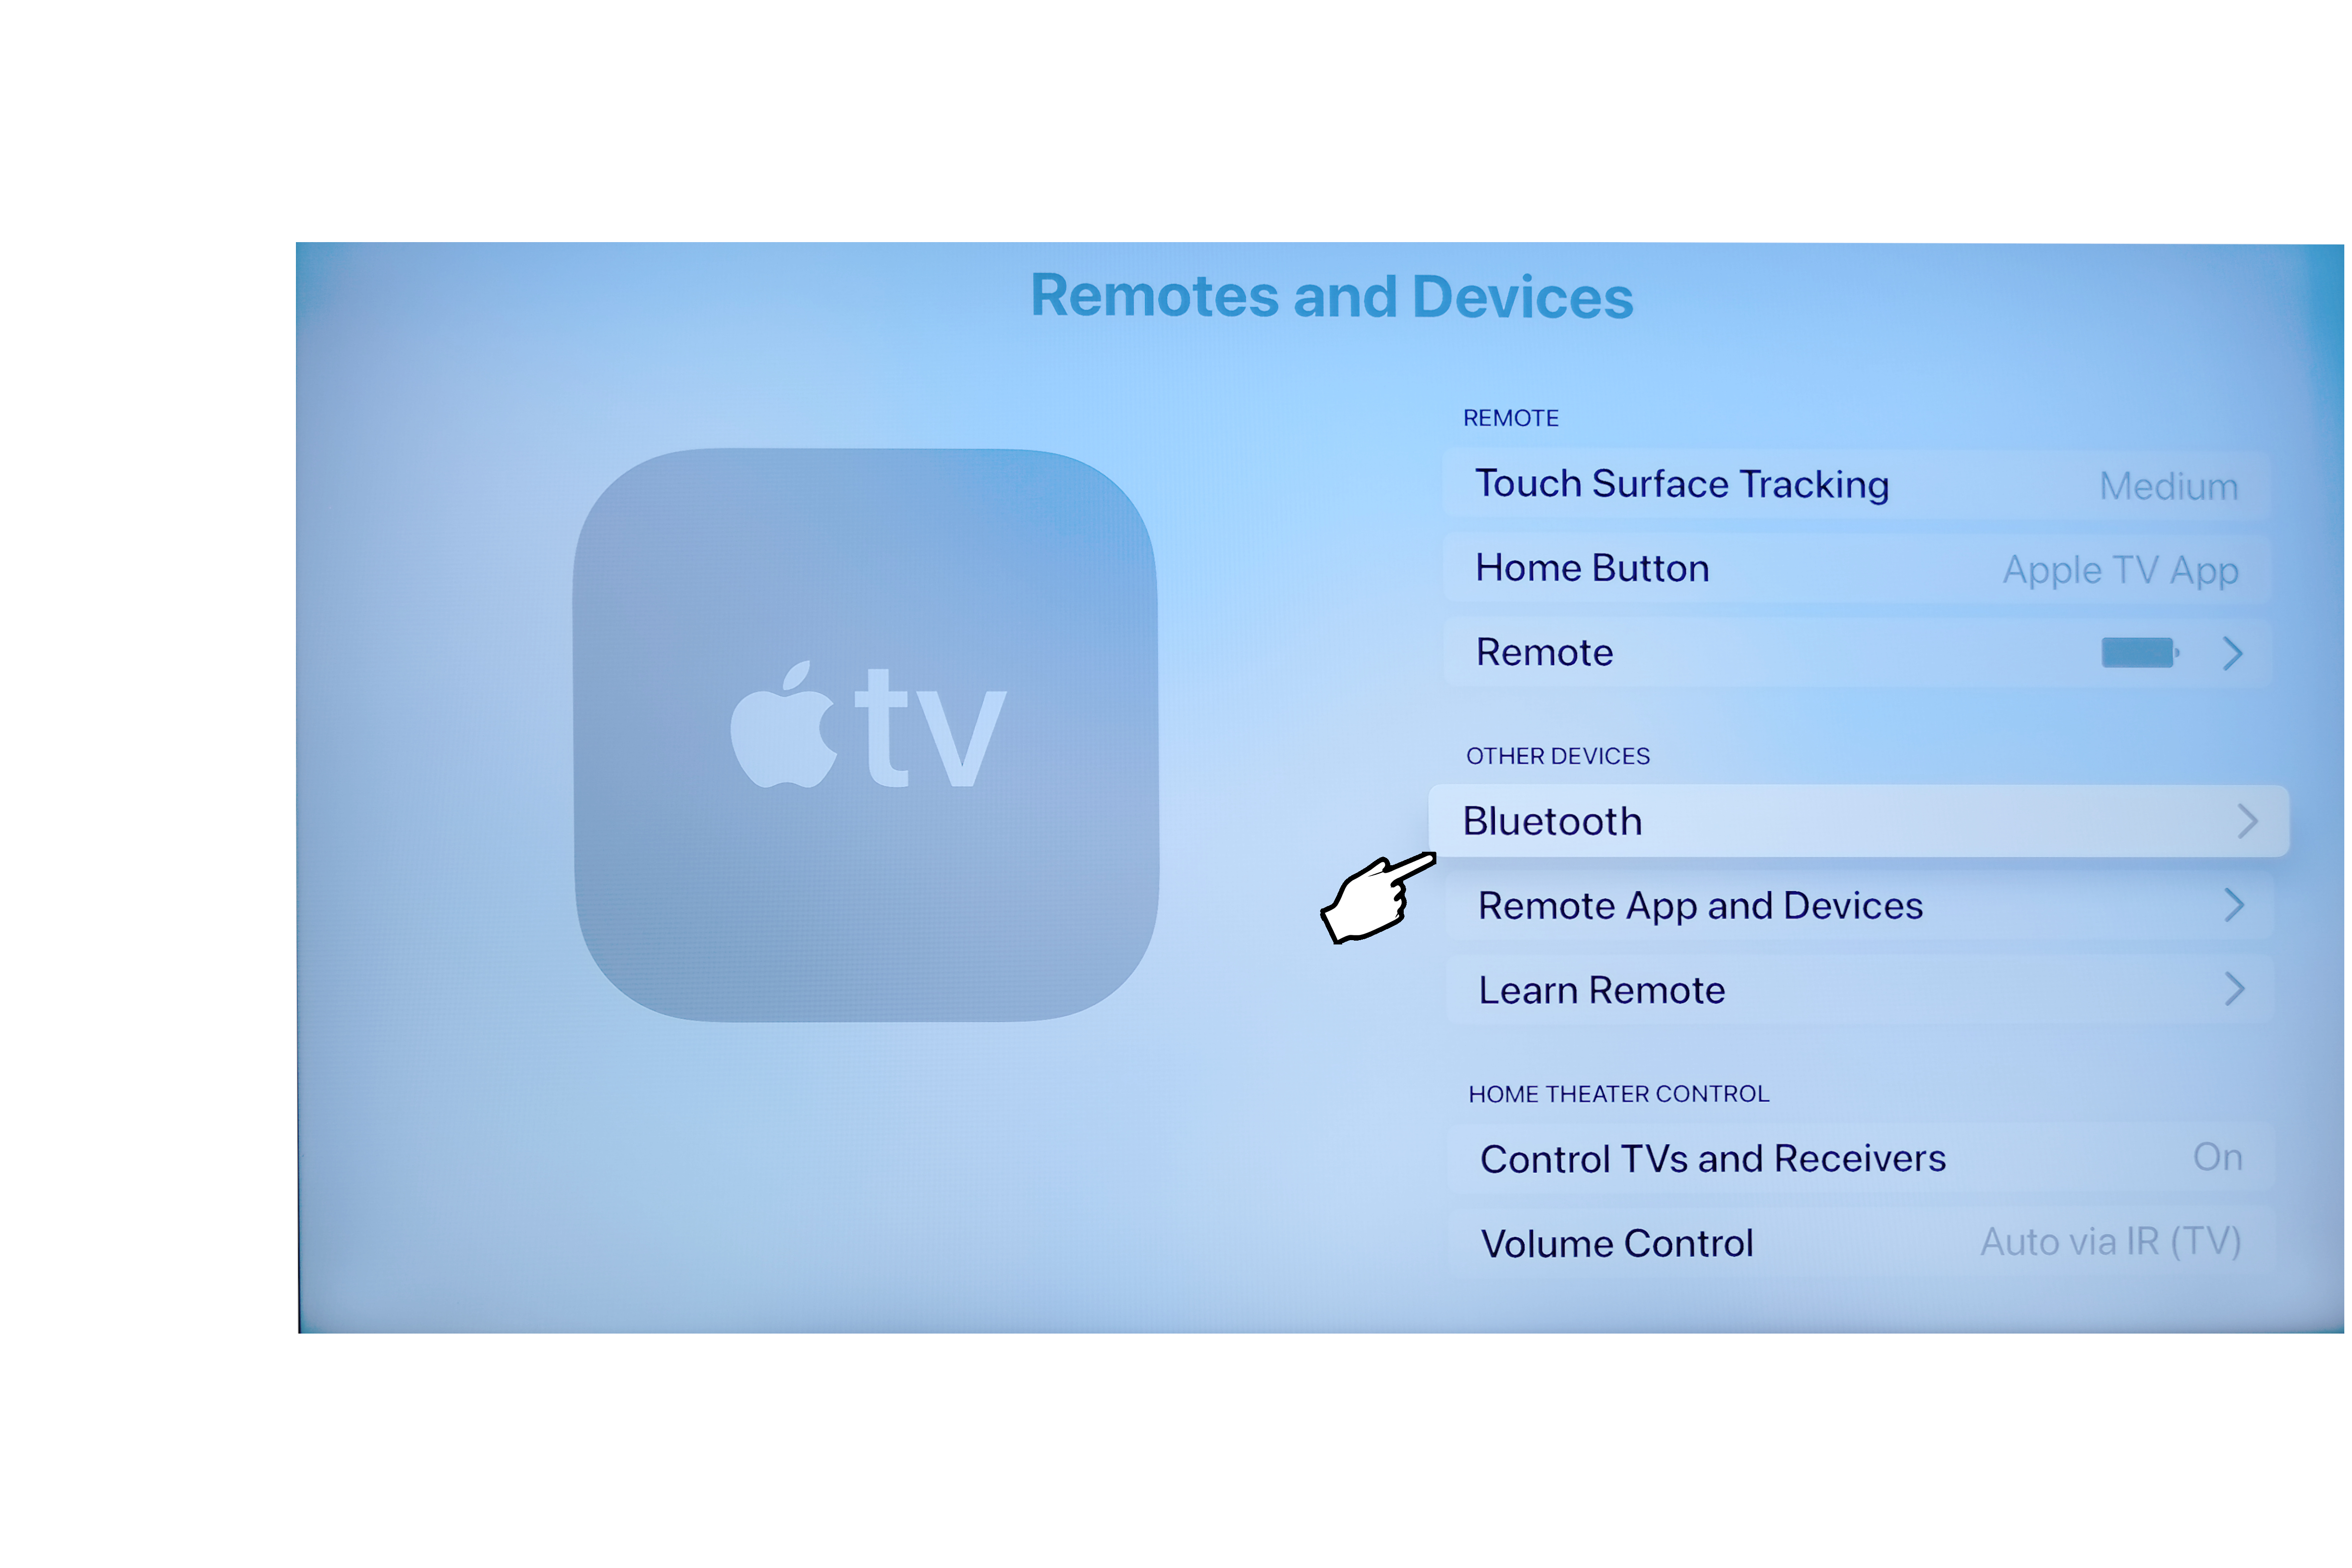 Apple TV Remotes and Devices setup page